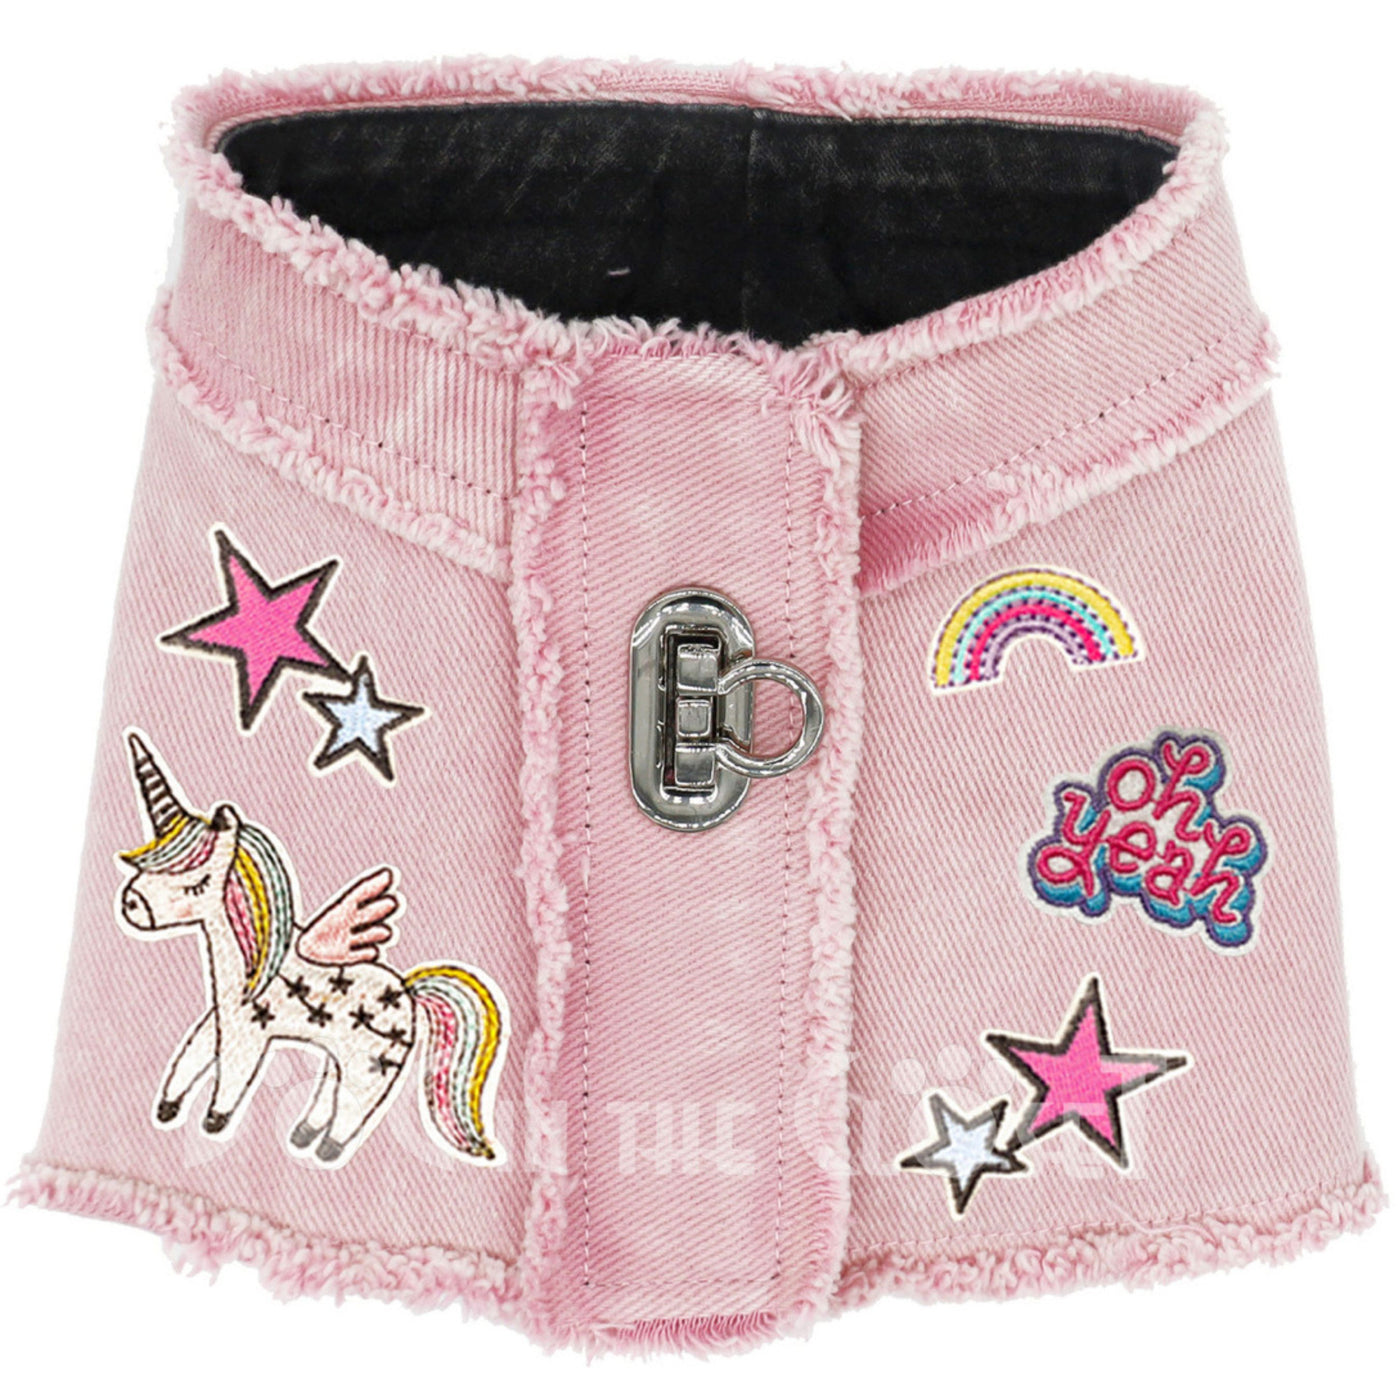 Oh Yeah Unicorns Denim Harness Vest for Dogs (3 Styles/Colors)